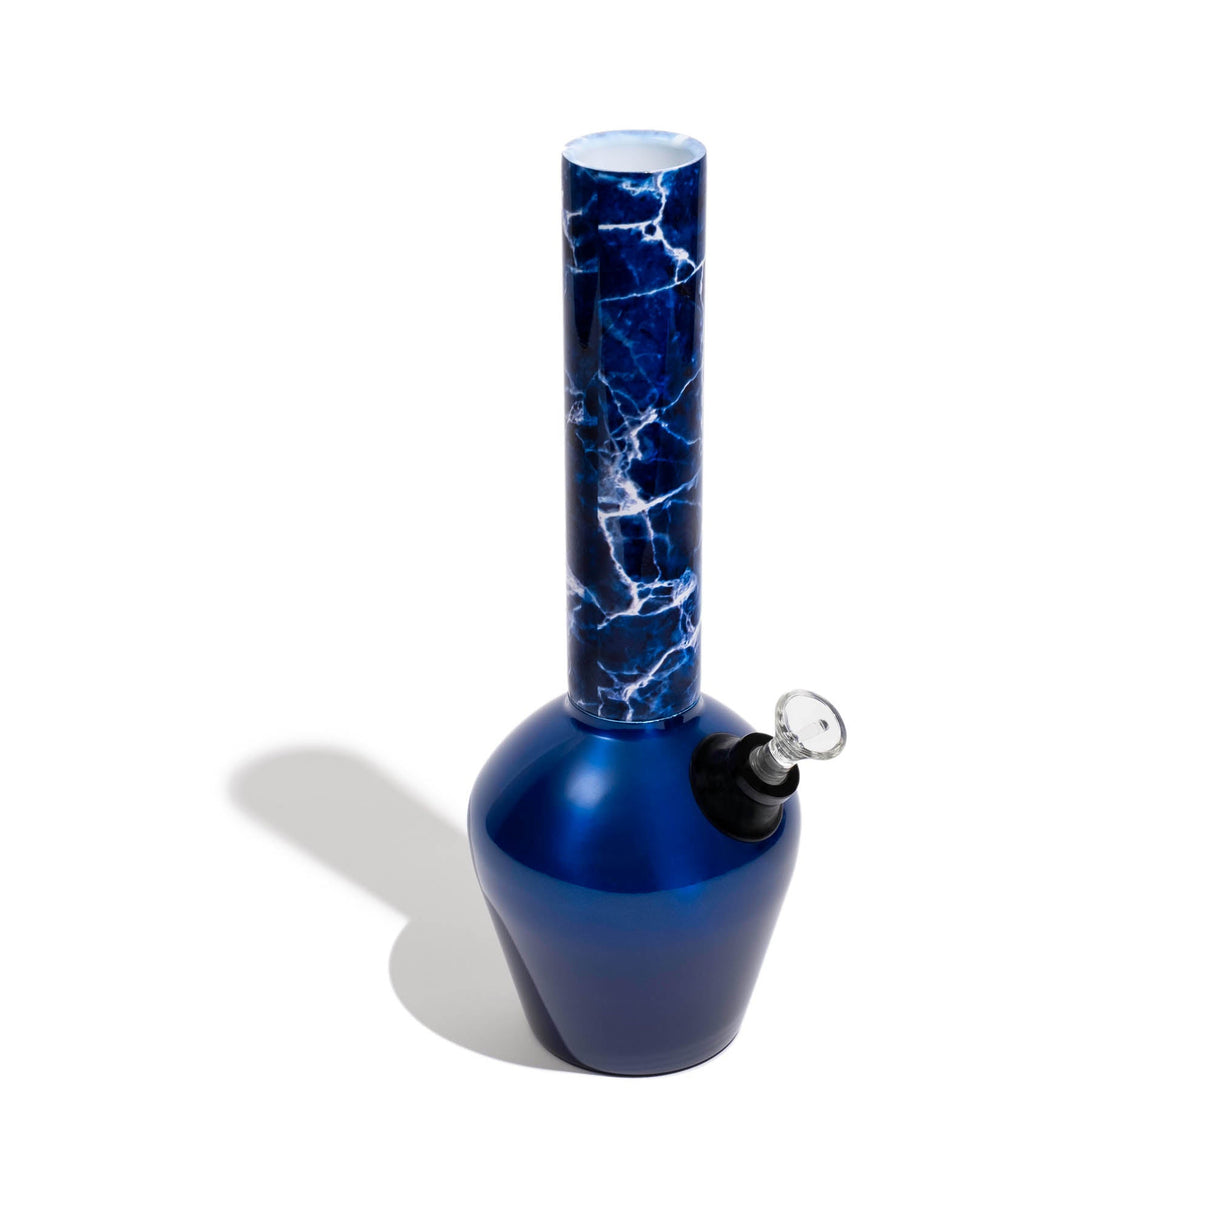 Chill Mix & Match Series bong with glossy blue base and marbled blue neck, top view